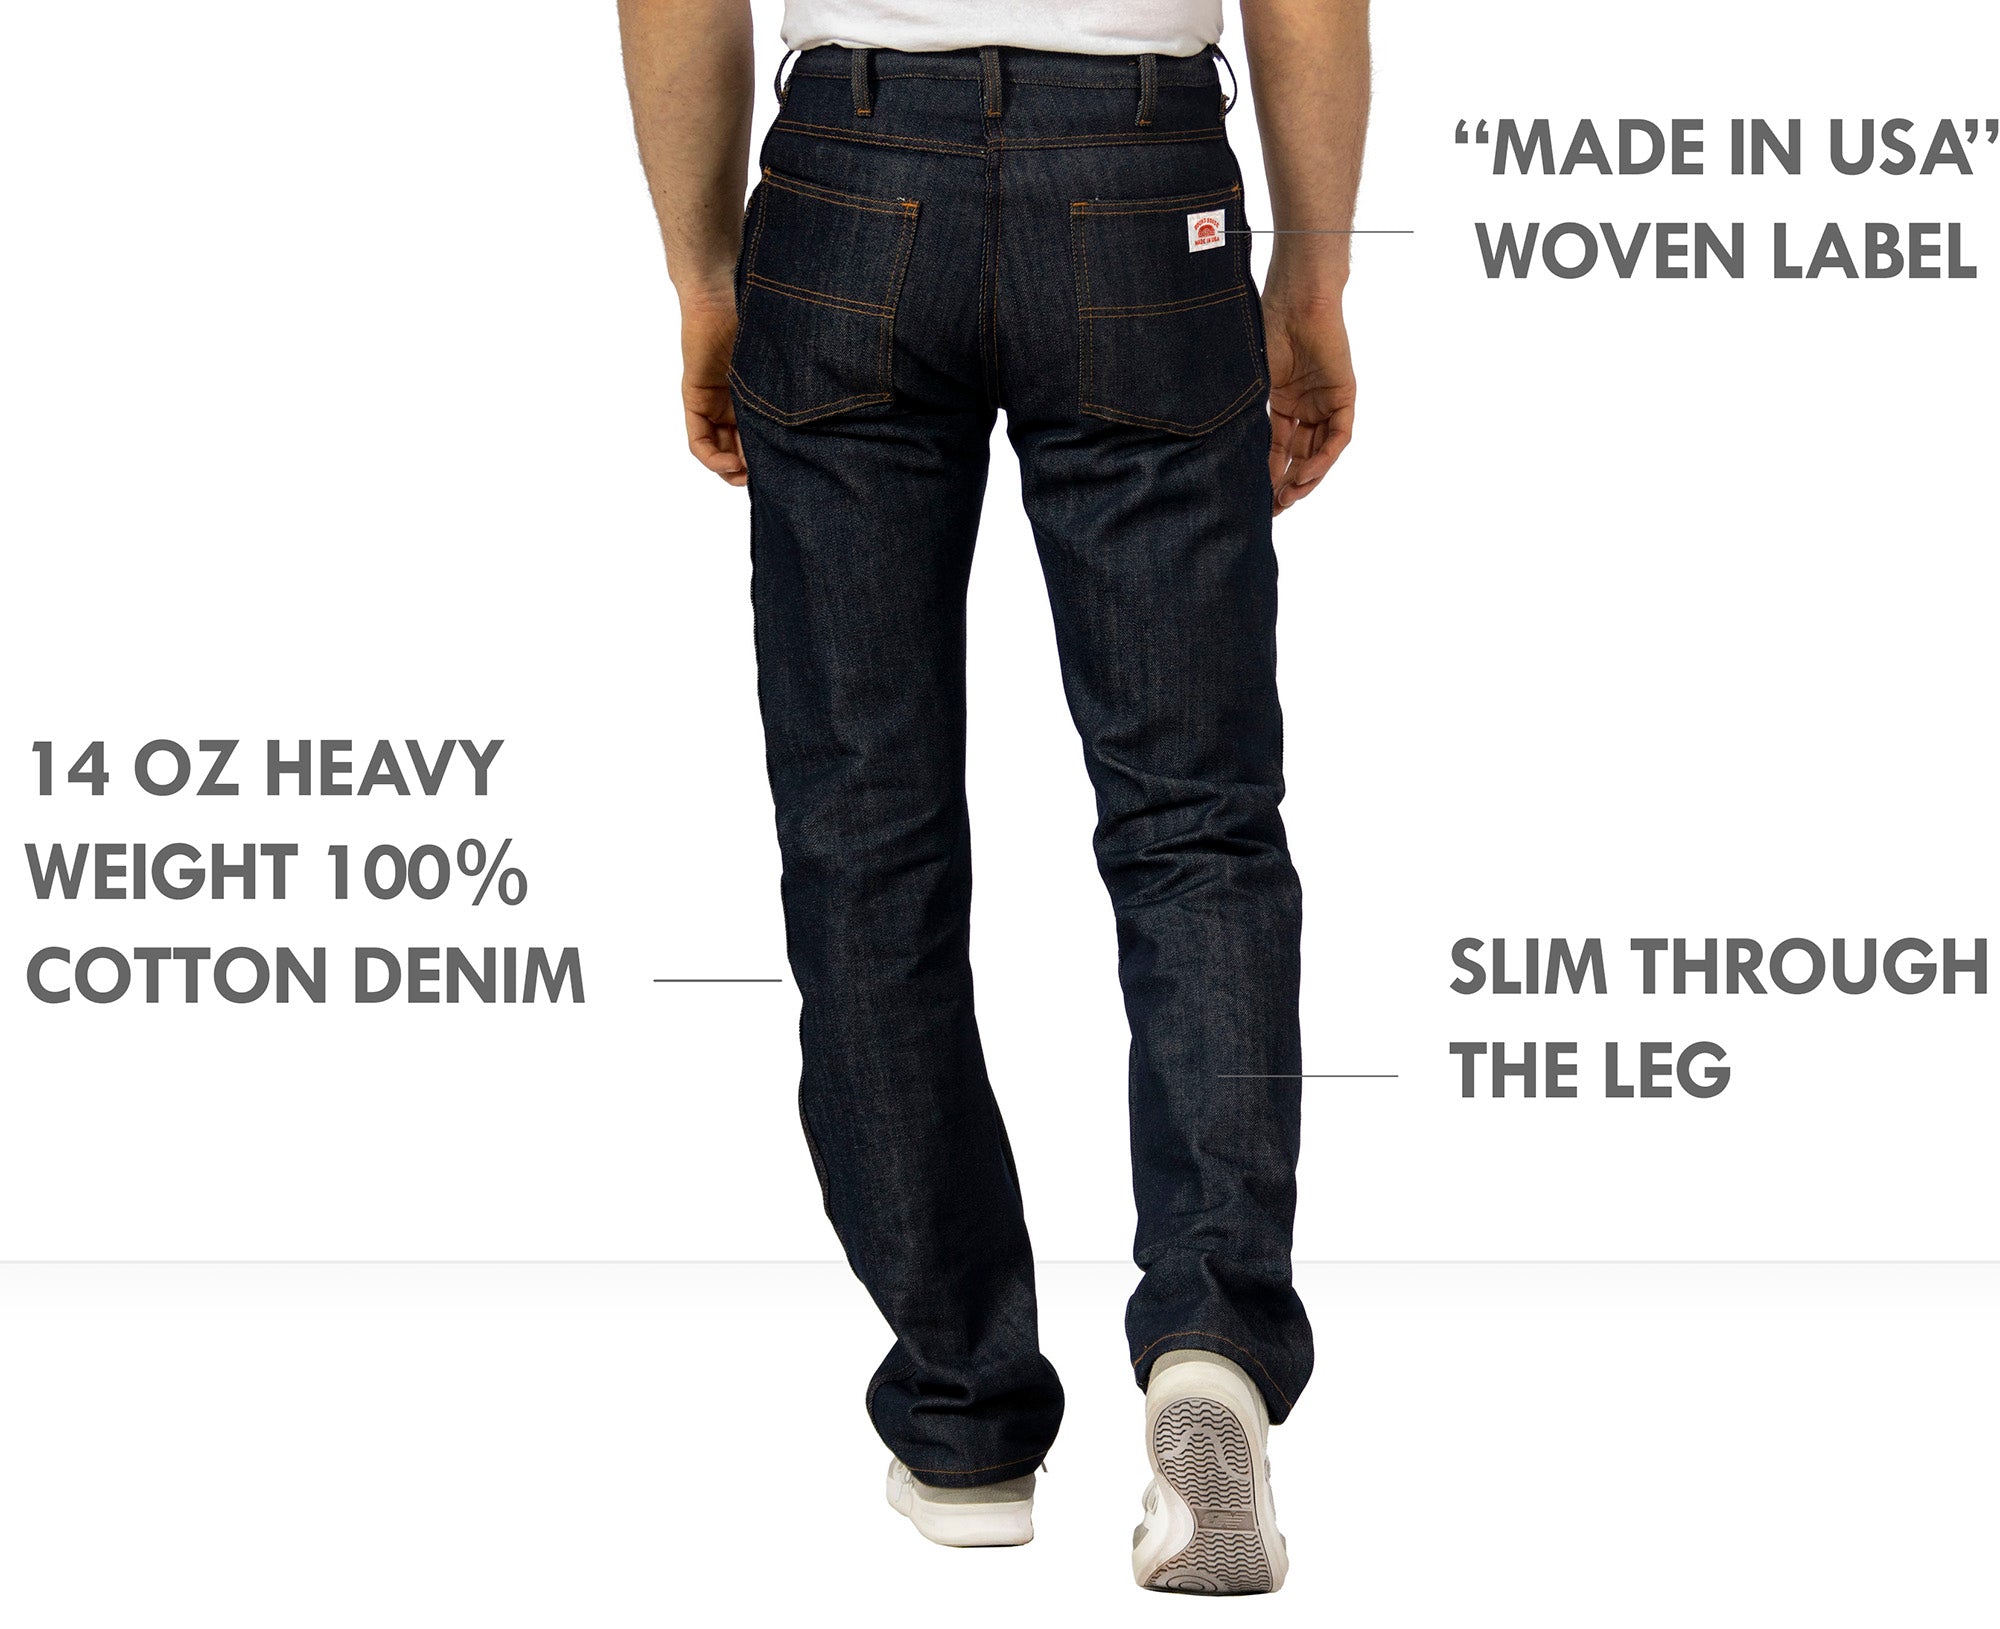 American Made Jeans Slim Fit 14 oz. Jeans Made in USA #182 – Round ...